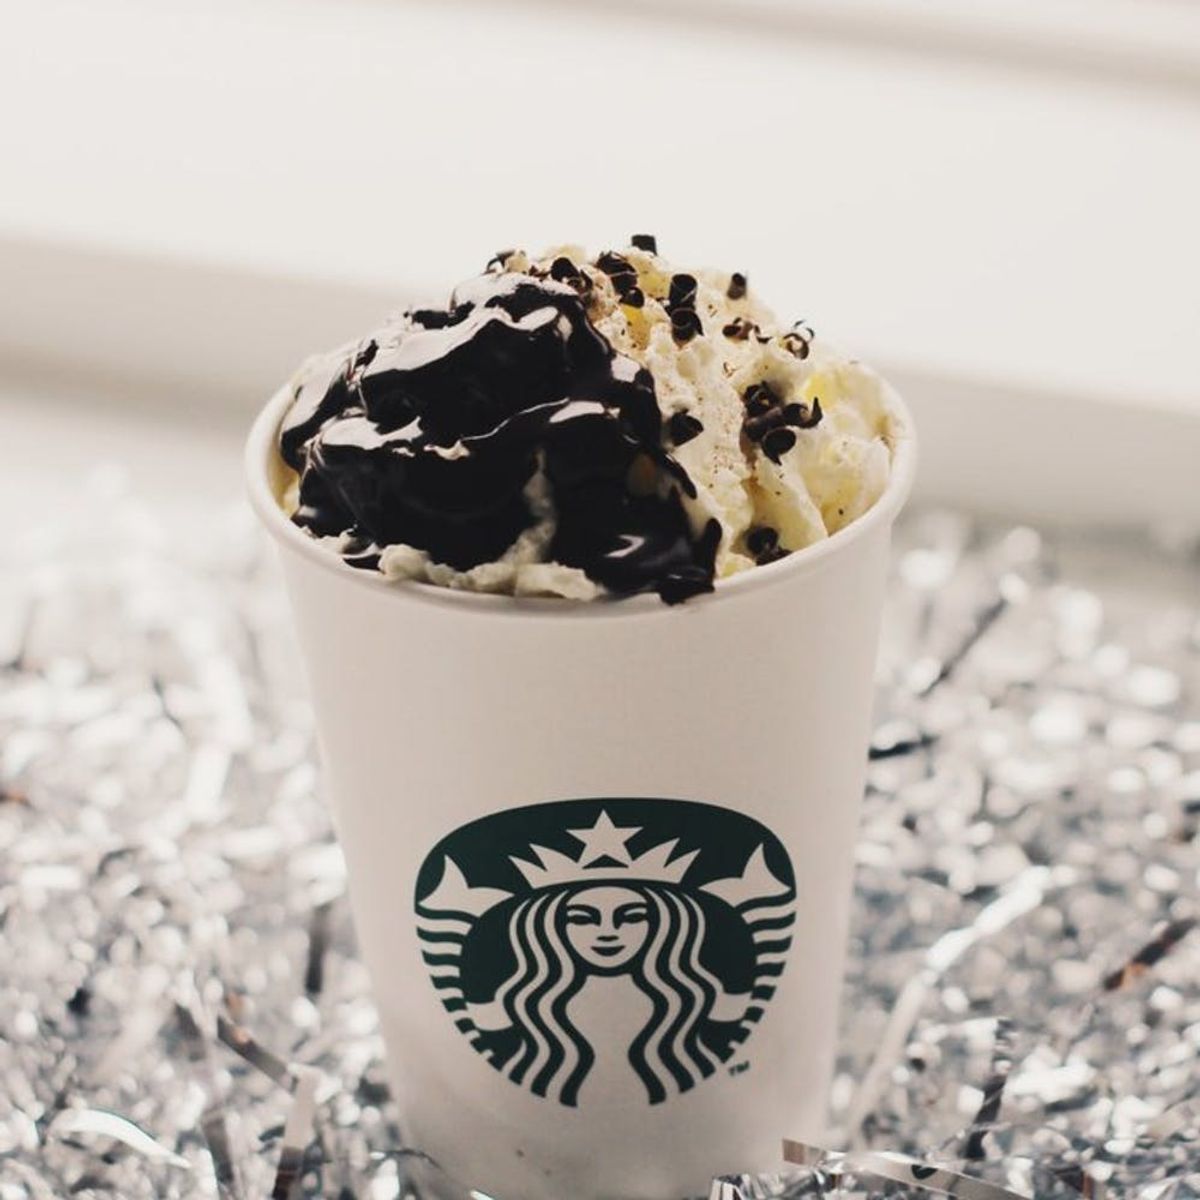 Starbucks Just Introduced 3 New Drinks to End Your Year Off Right